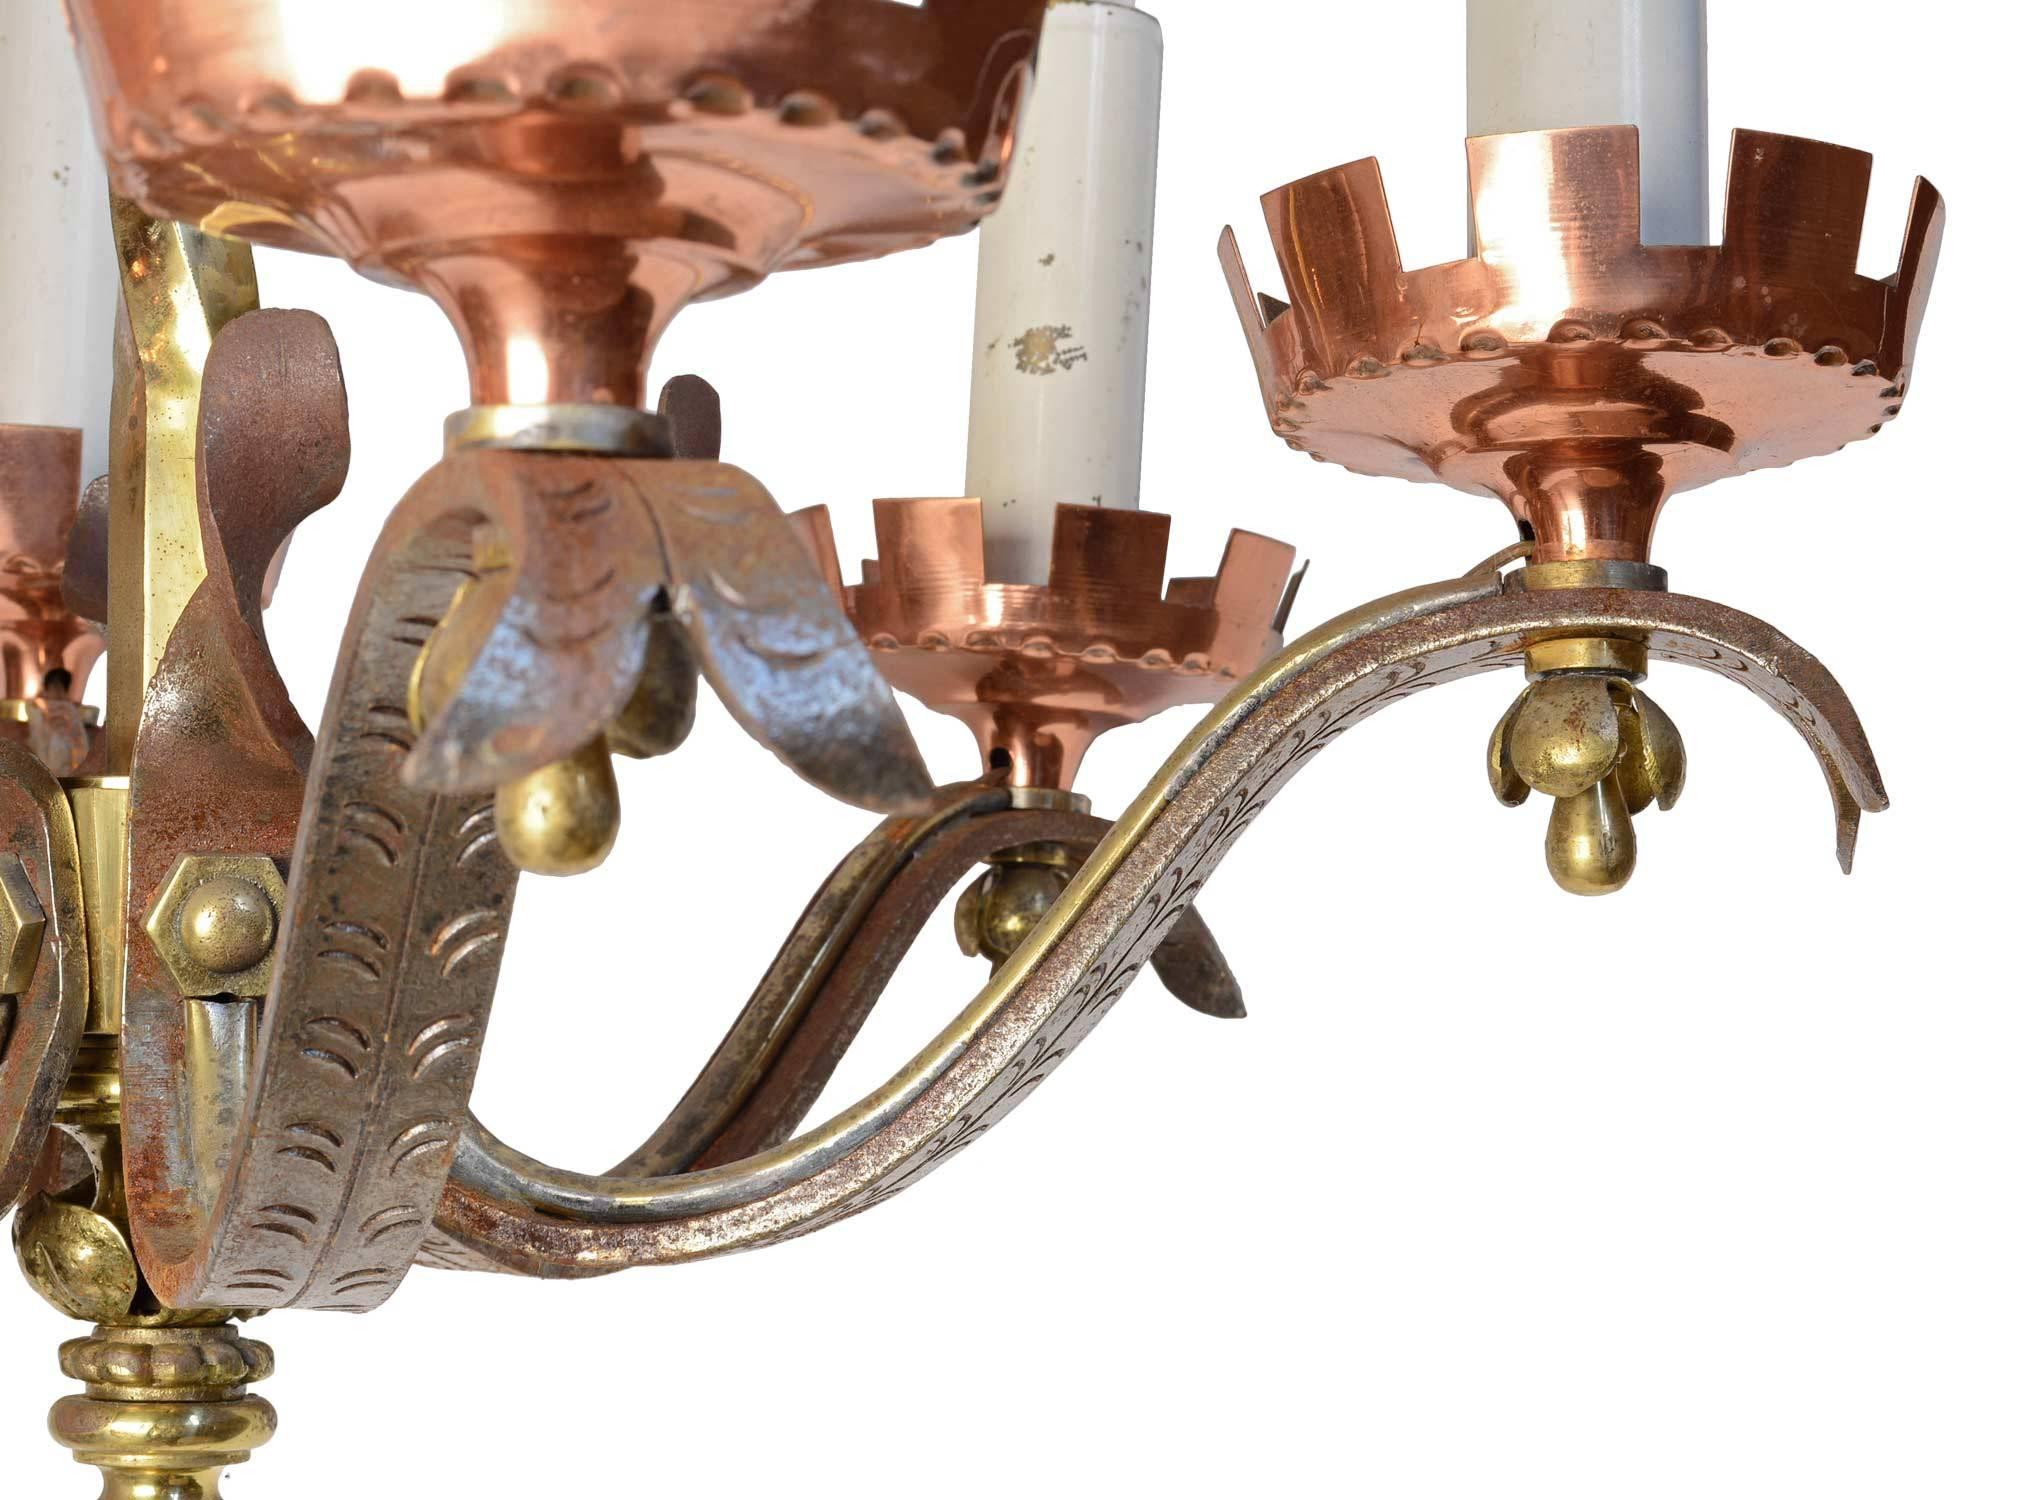 This six-candle Gothic Revival chandelier is a beautiful mix of many metals and textures. The fixture's heavy cast brass body and finials, flared cast iron arms with decorative ornamentation, and copper bobeches combine to create a dynamic piece.